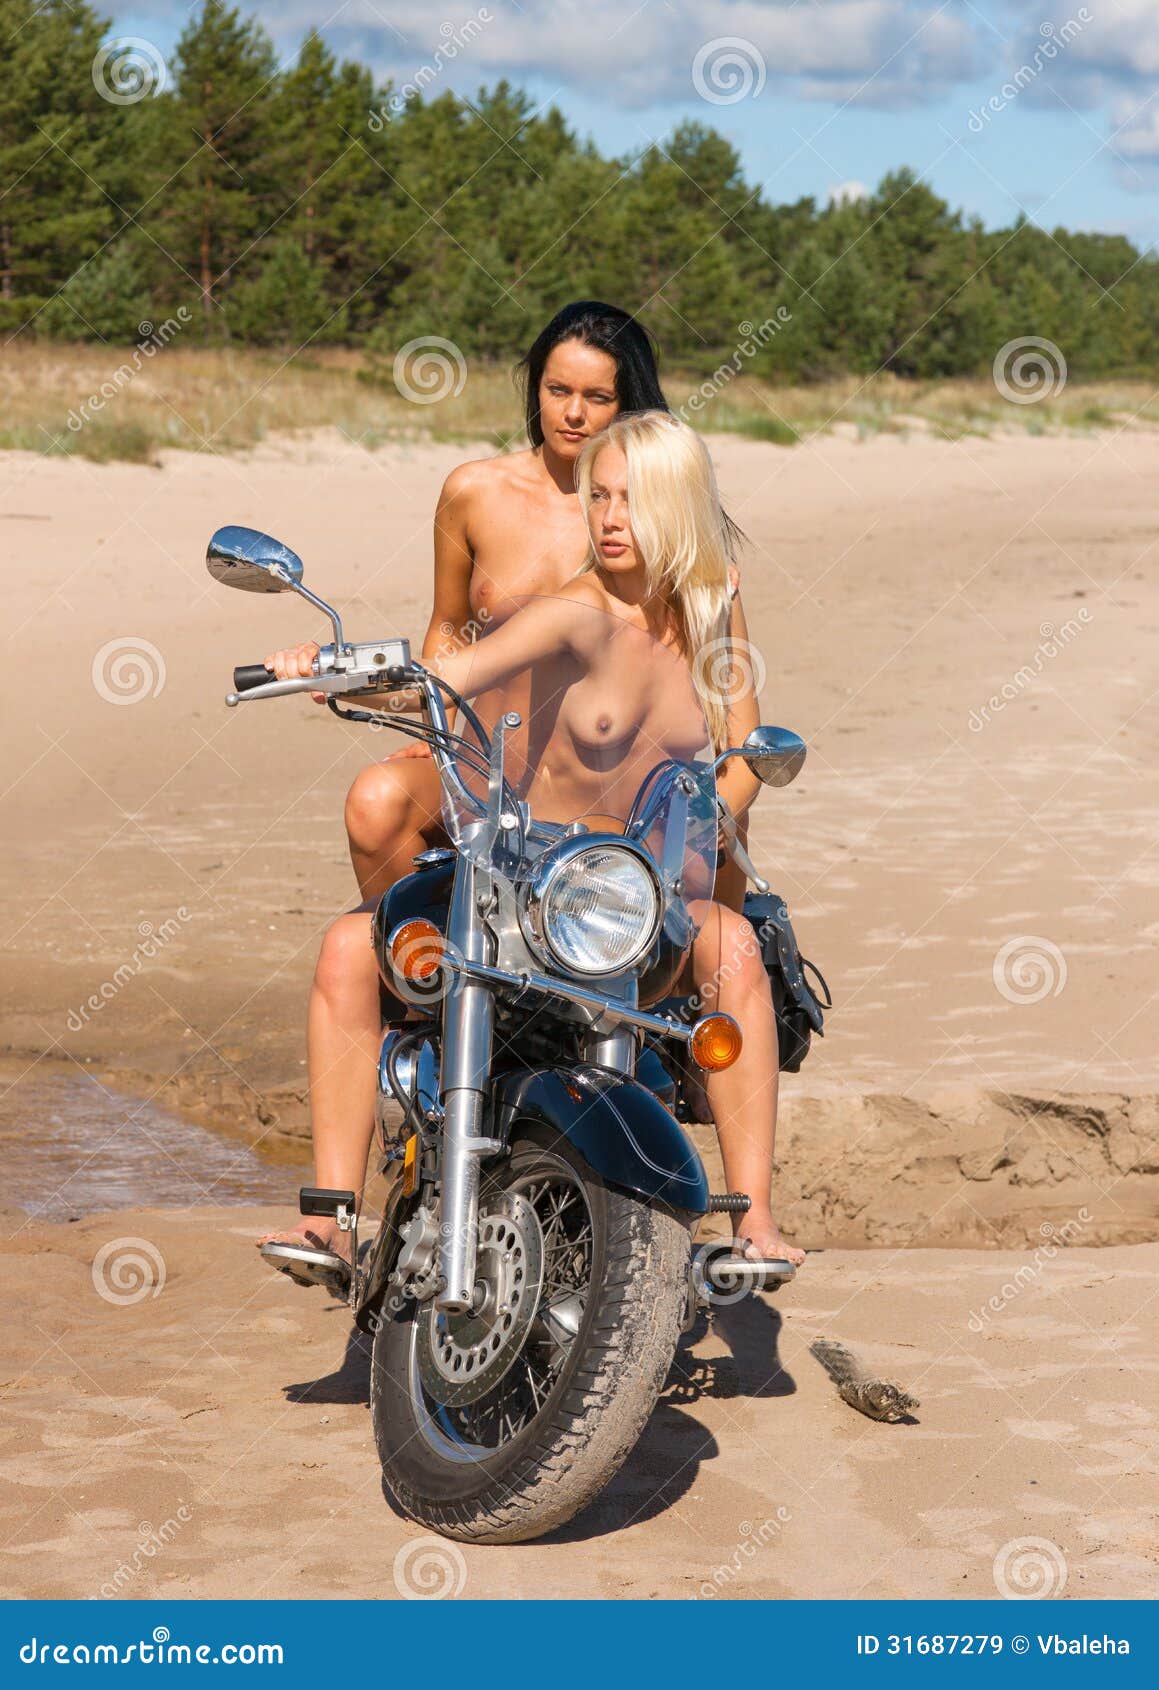 aprill tucker add nude on motorcycles photo